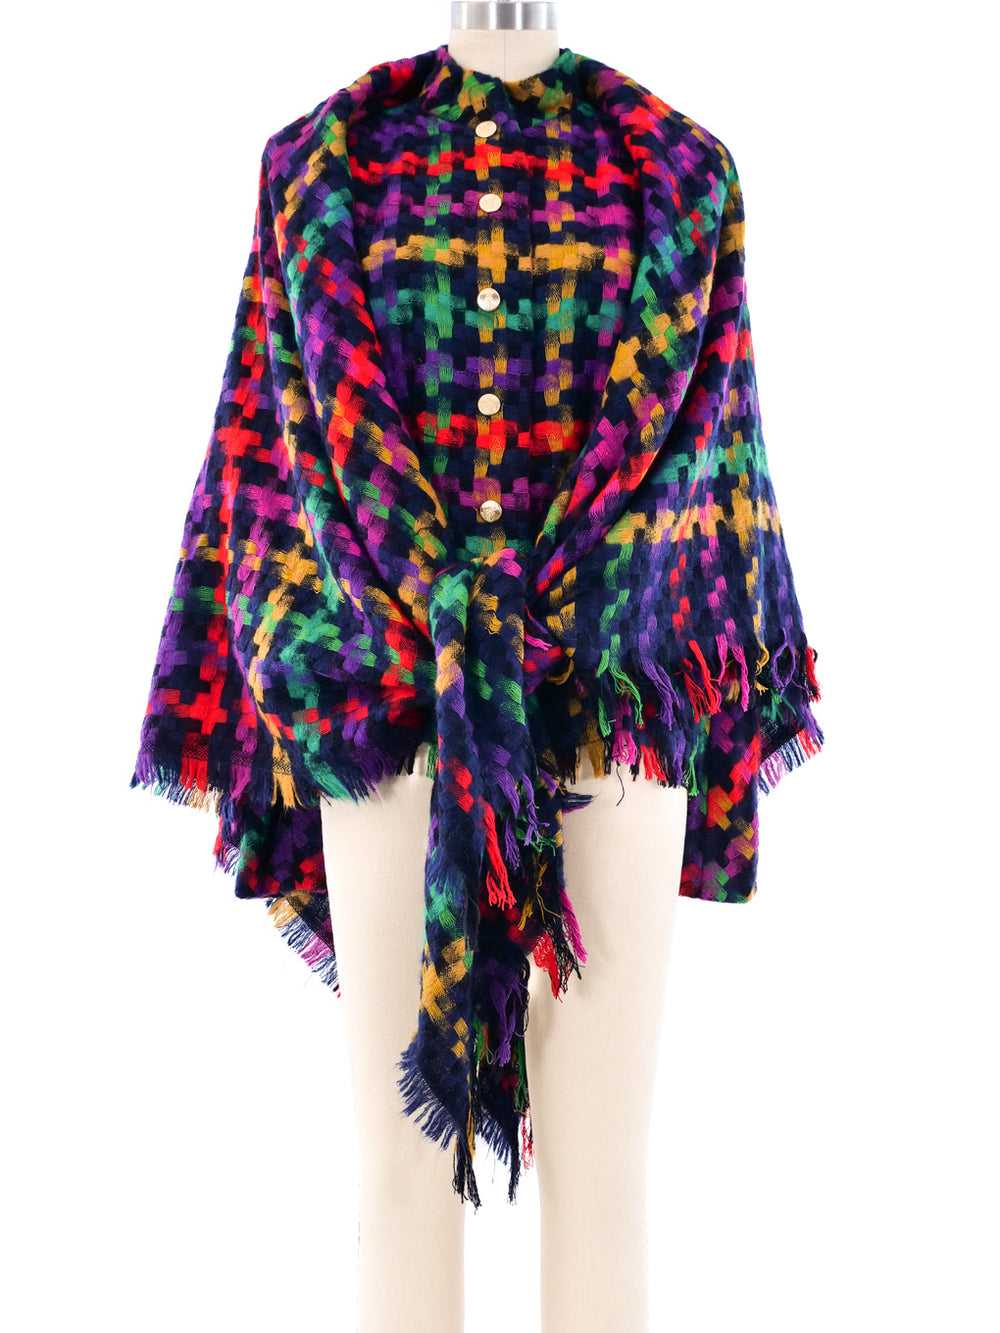 Pauline Trigere Woven Blazer with Scarf - image 8